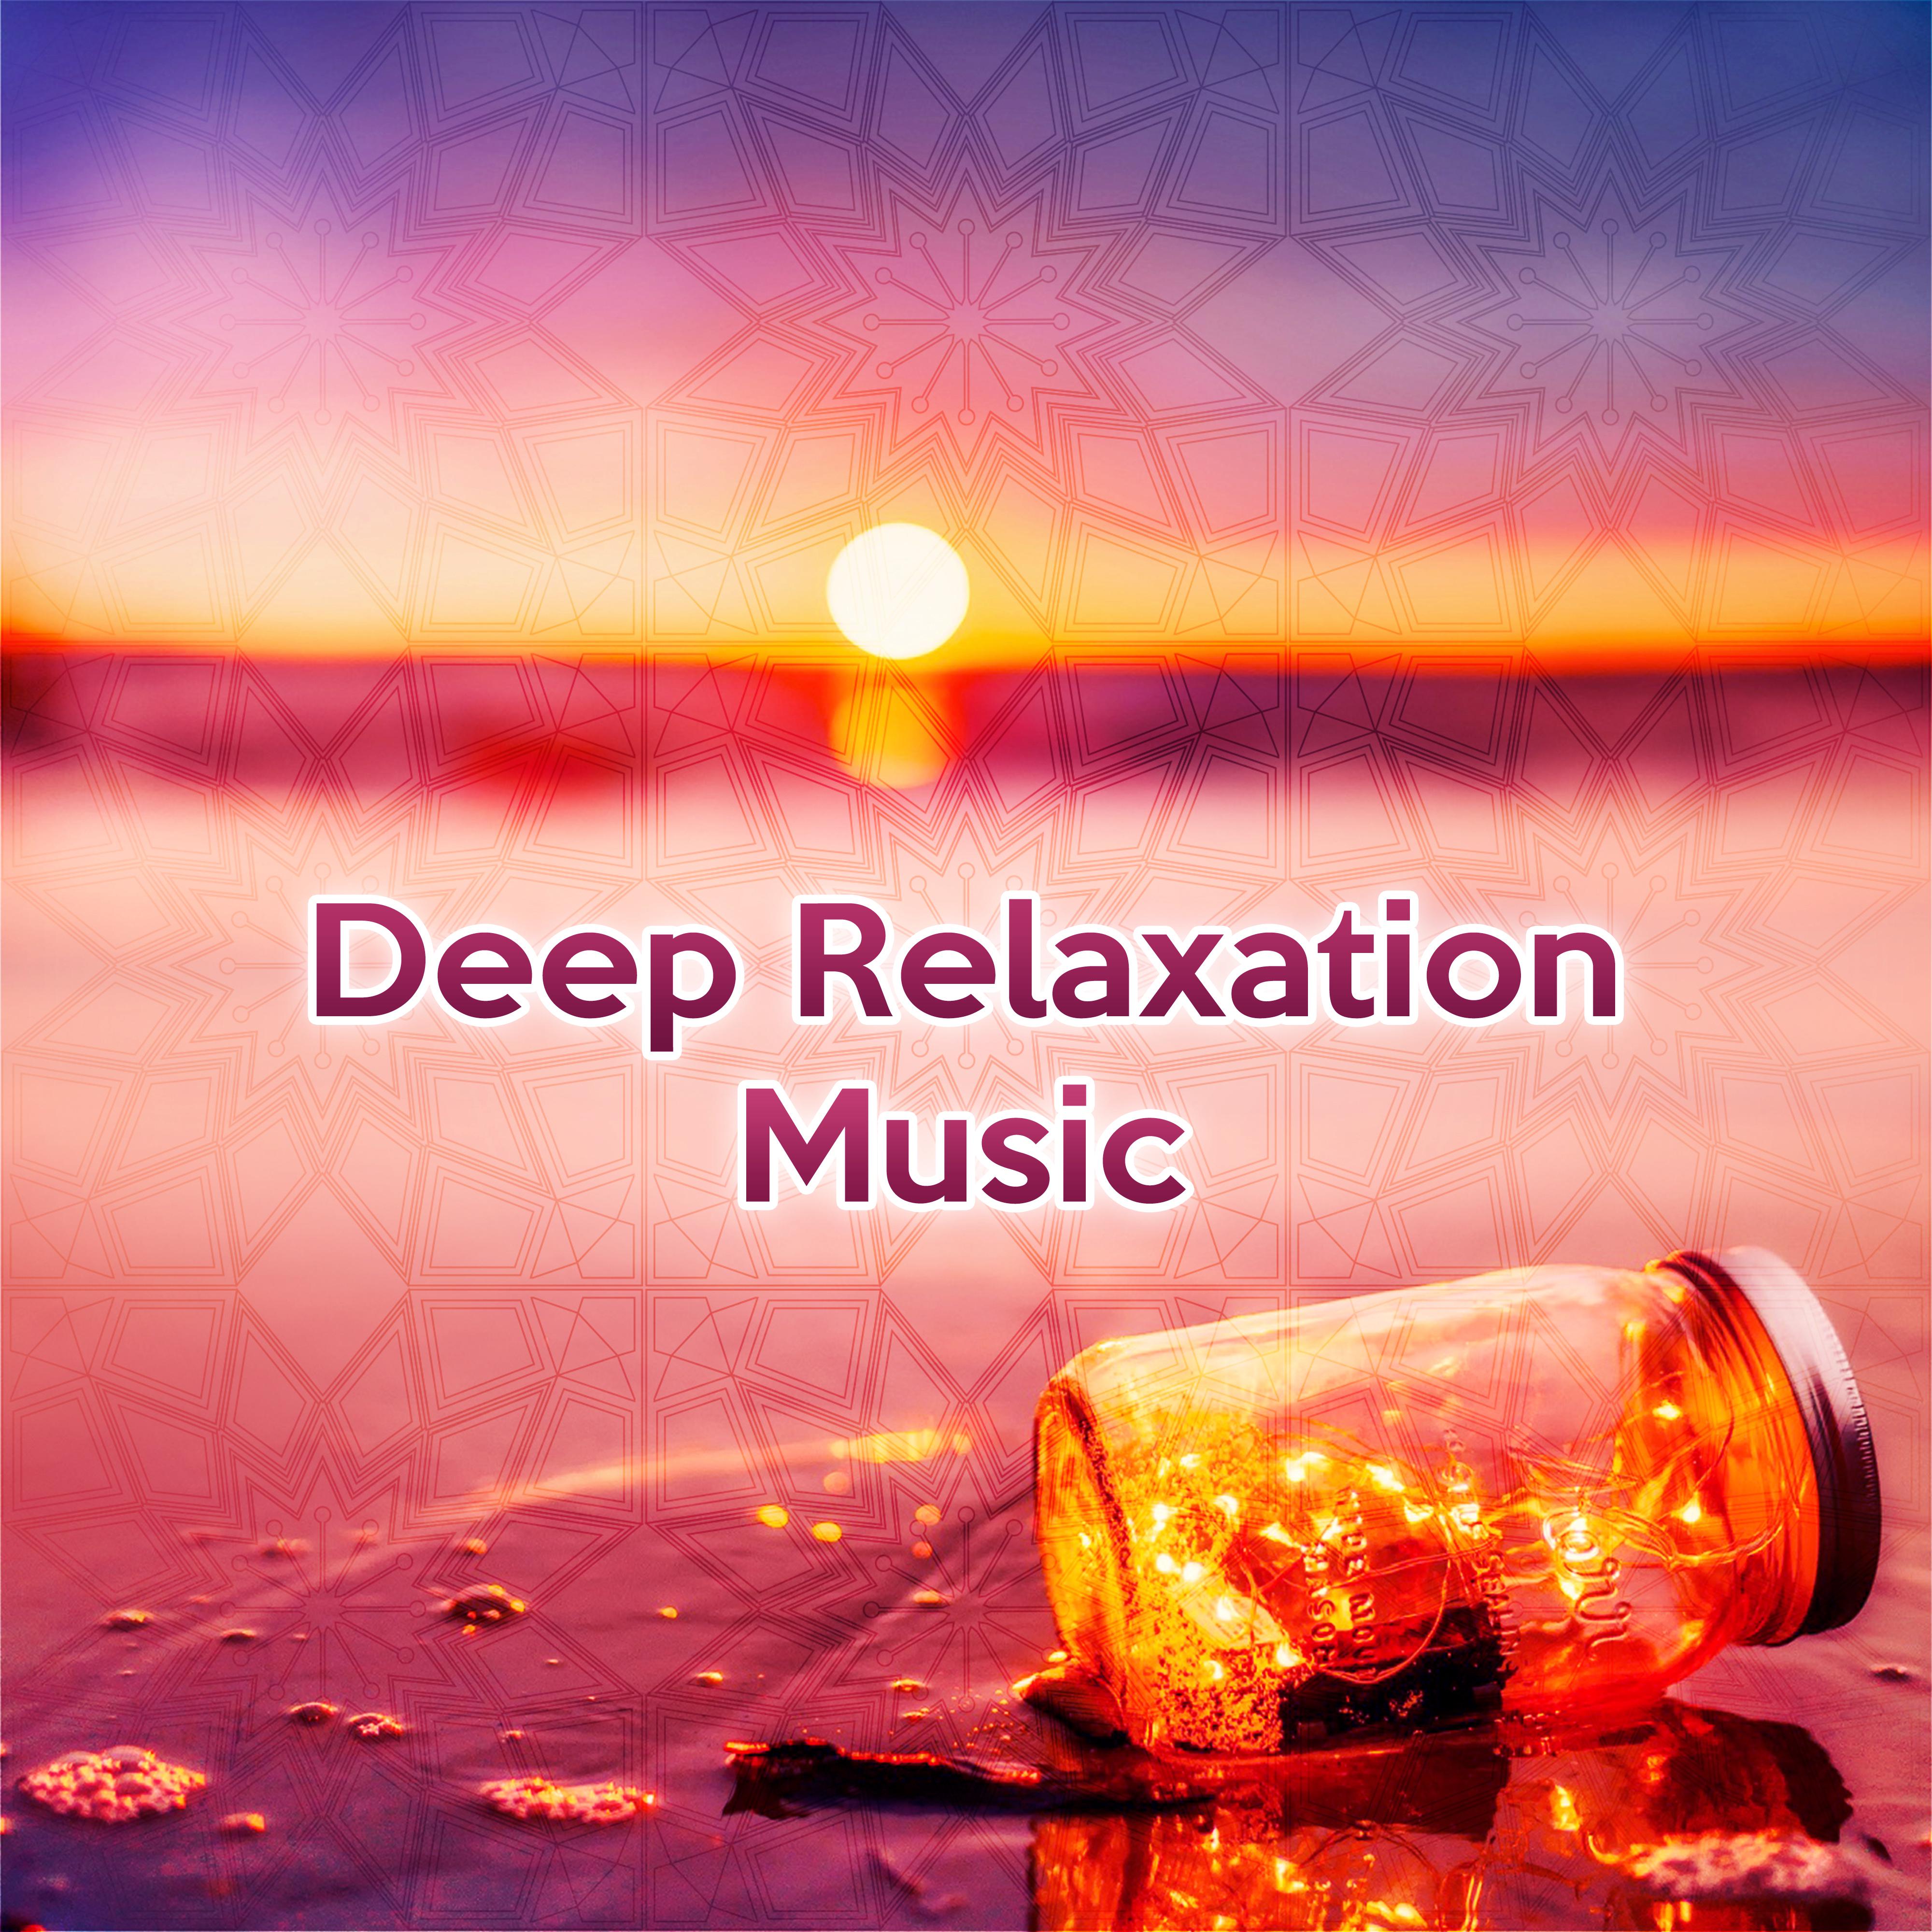 Deep Relaxation Music – Chill Out 2017, Rest on the Beach, Exotic Island, Time to Calm Down